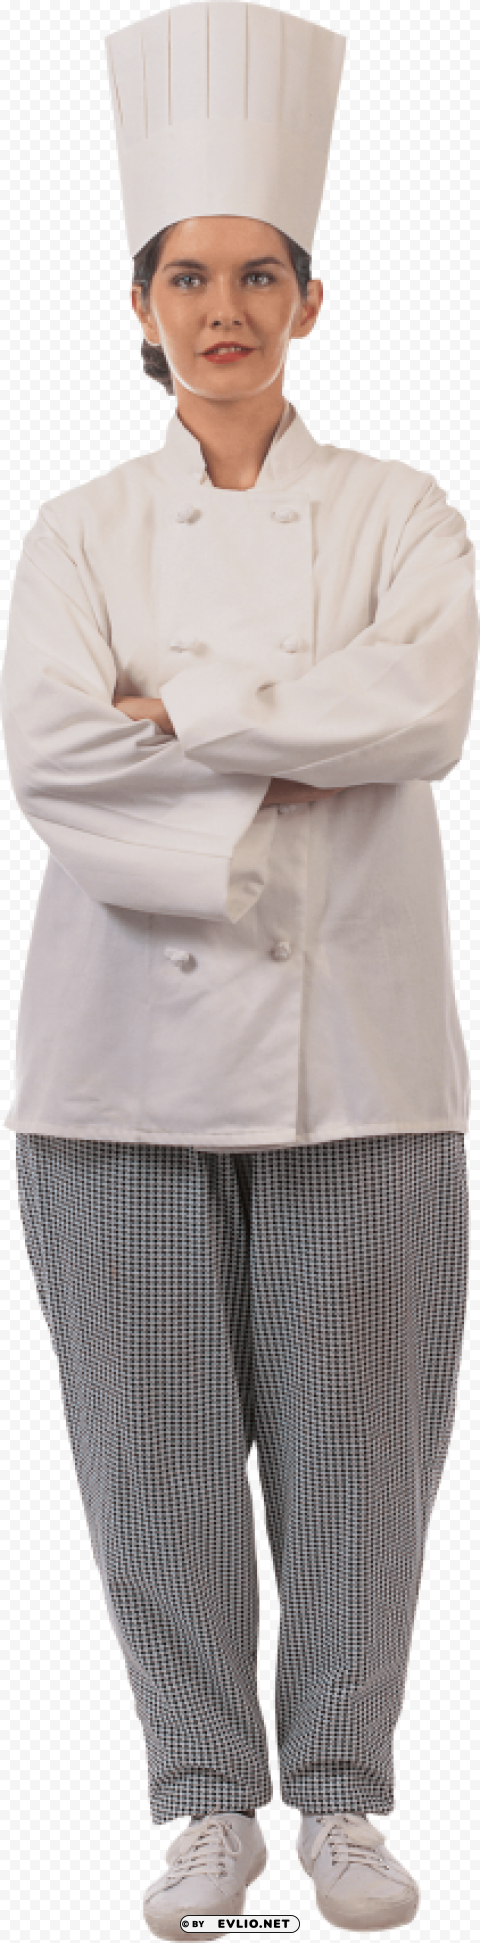 chef Transparent Background Isolated PNG Item